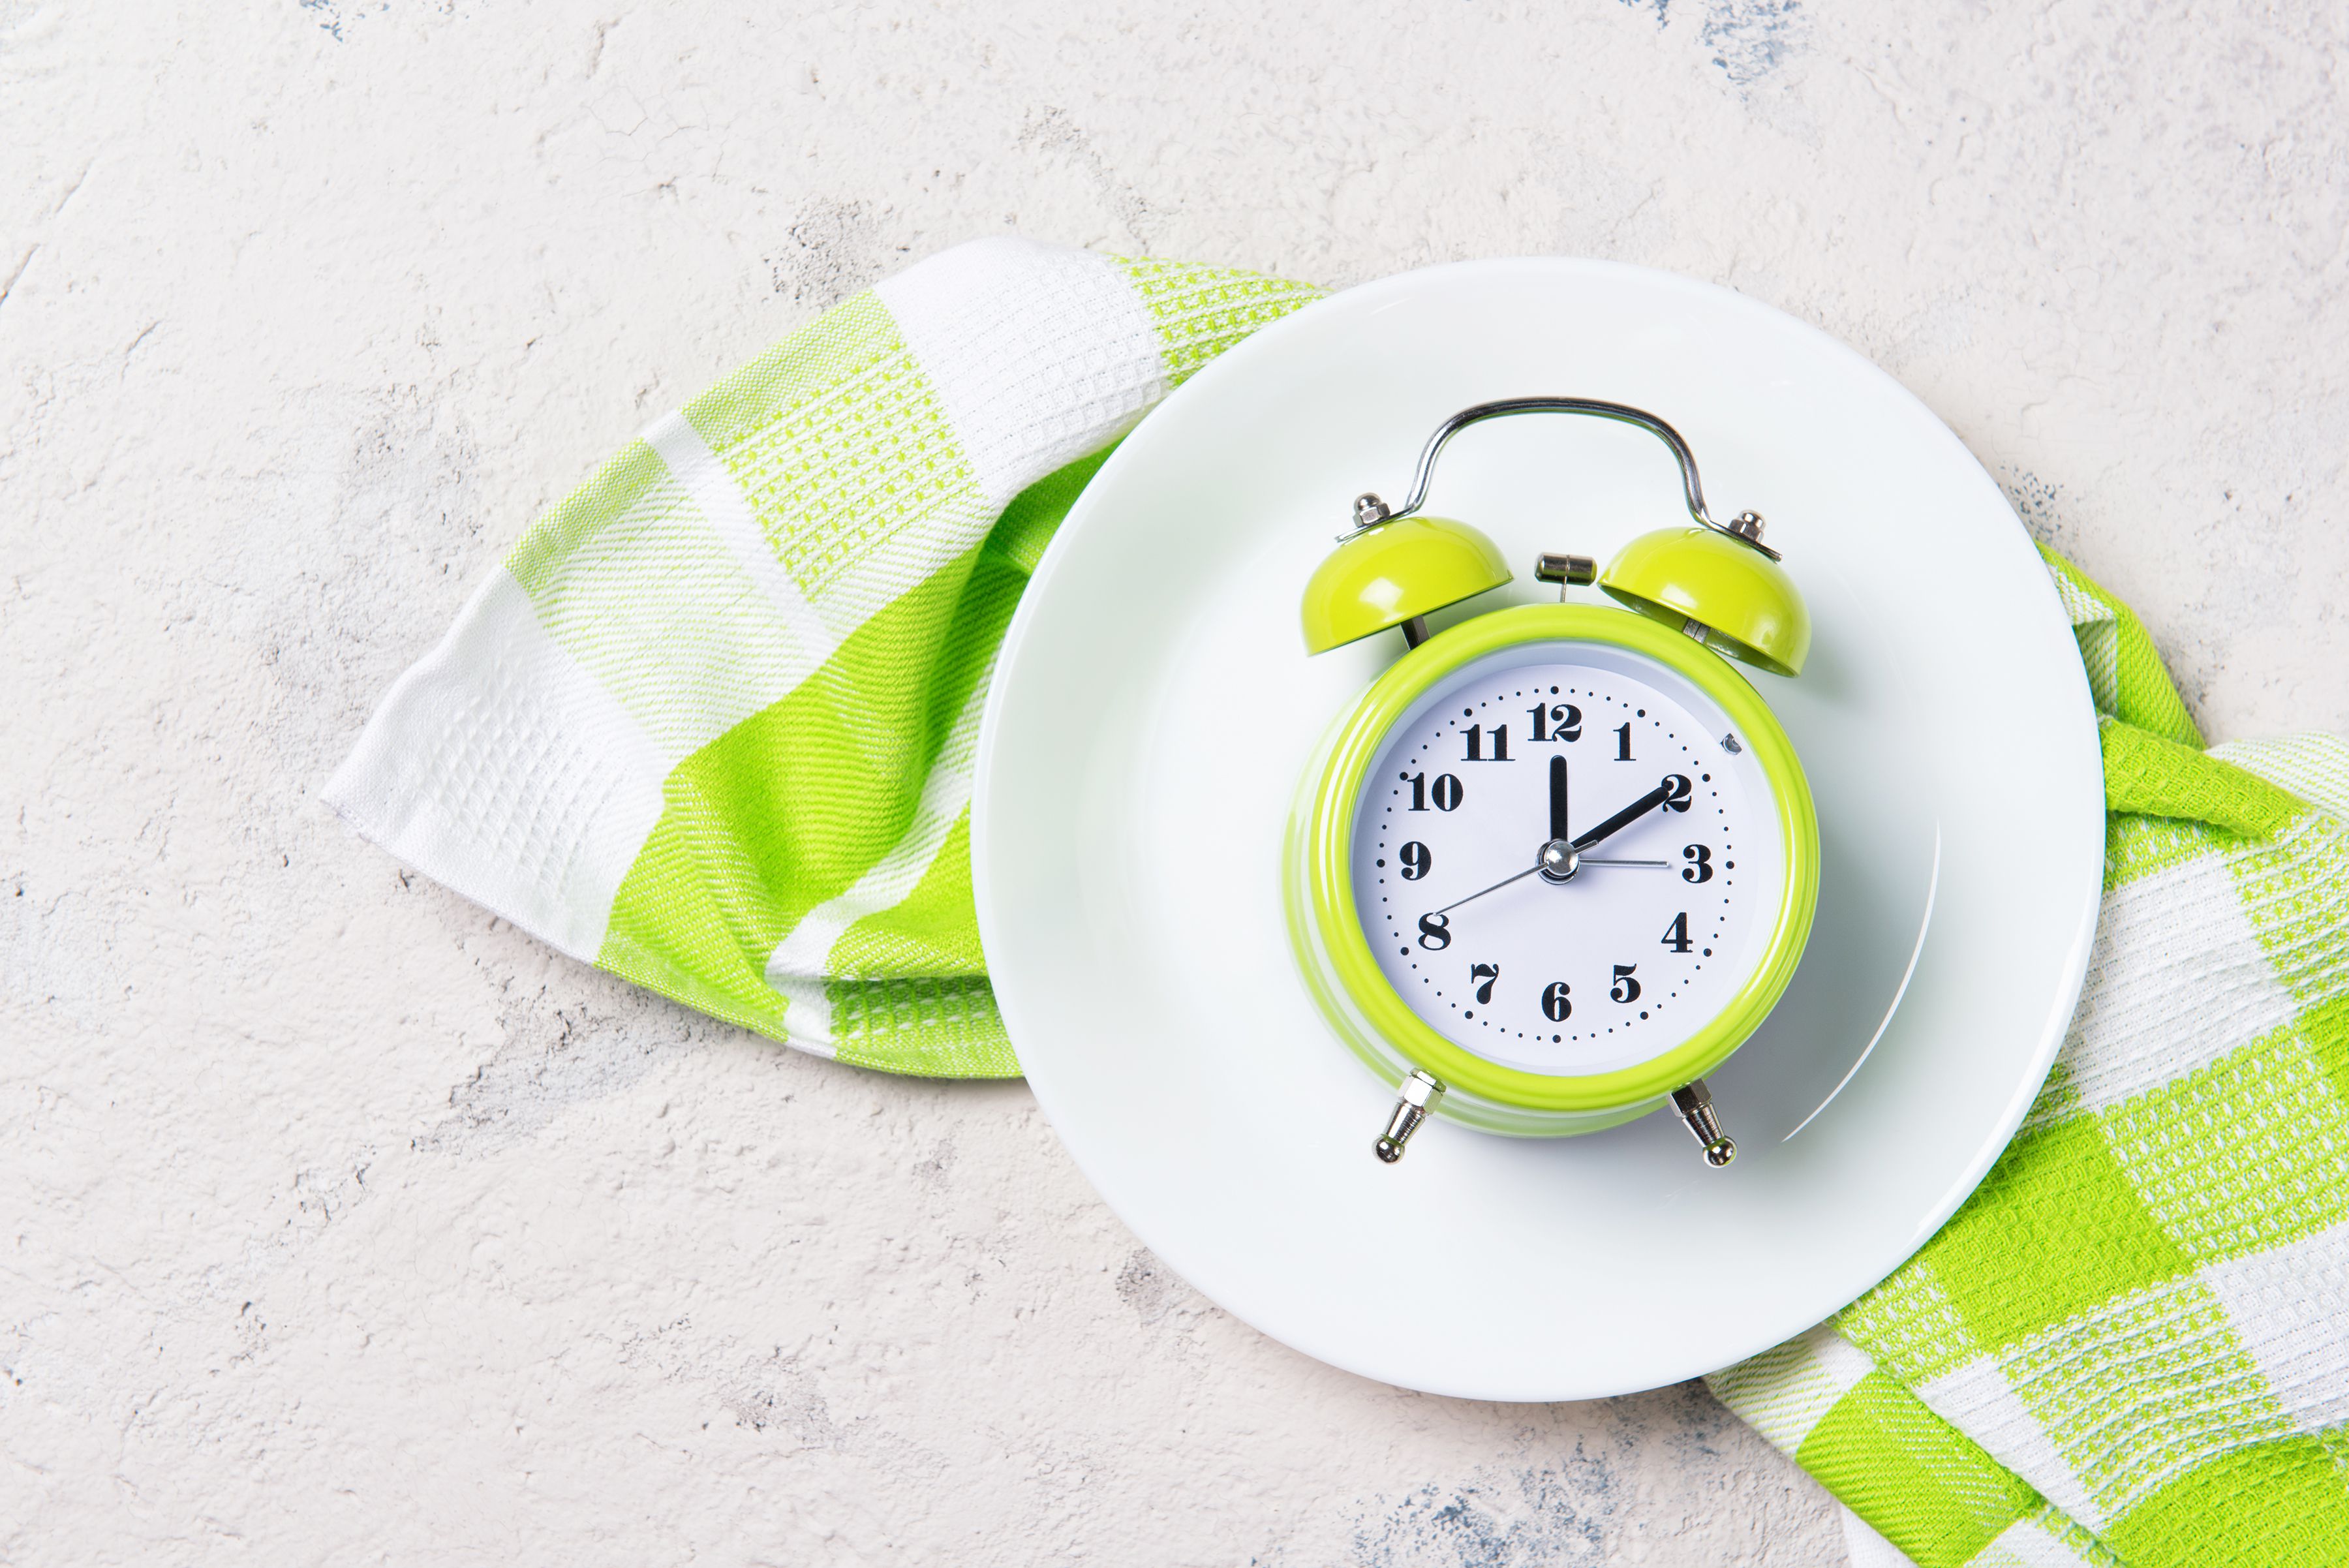 Fasting can affect the body's biological clock